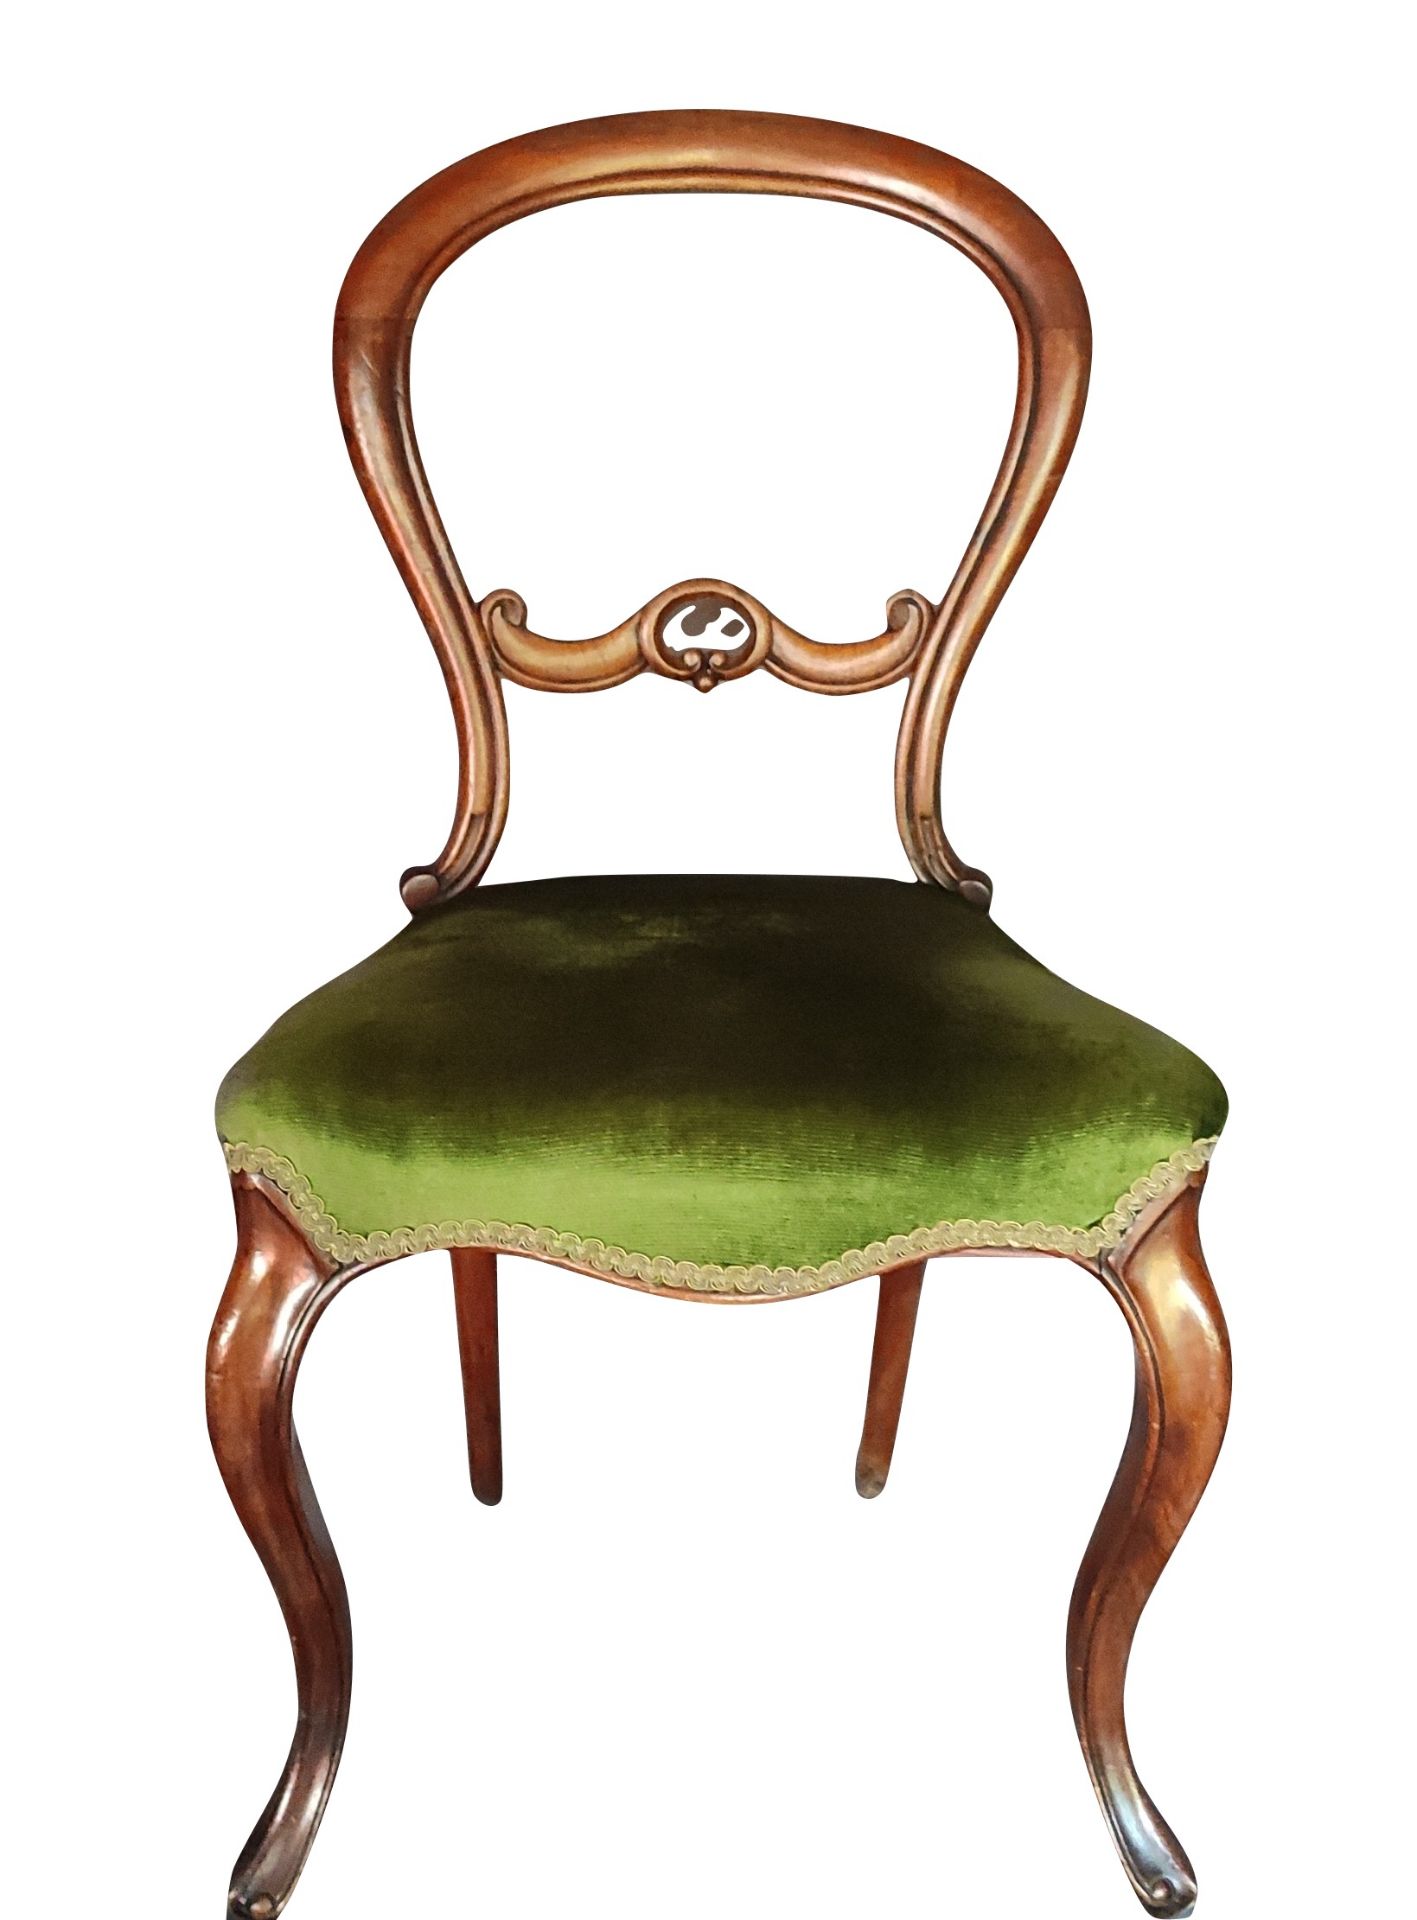 Ornamental side chair, Viennese Baroque, openwork and curved backrest, front legs curved with indic